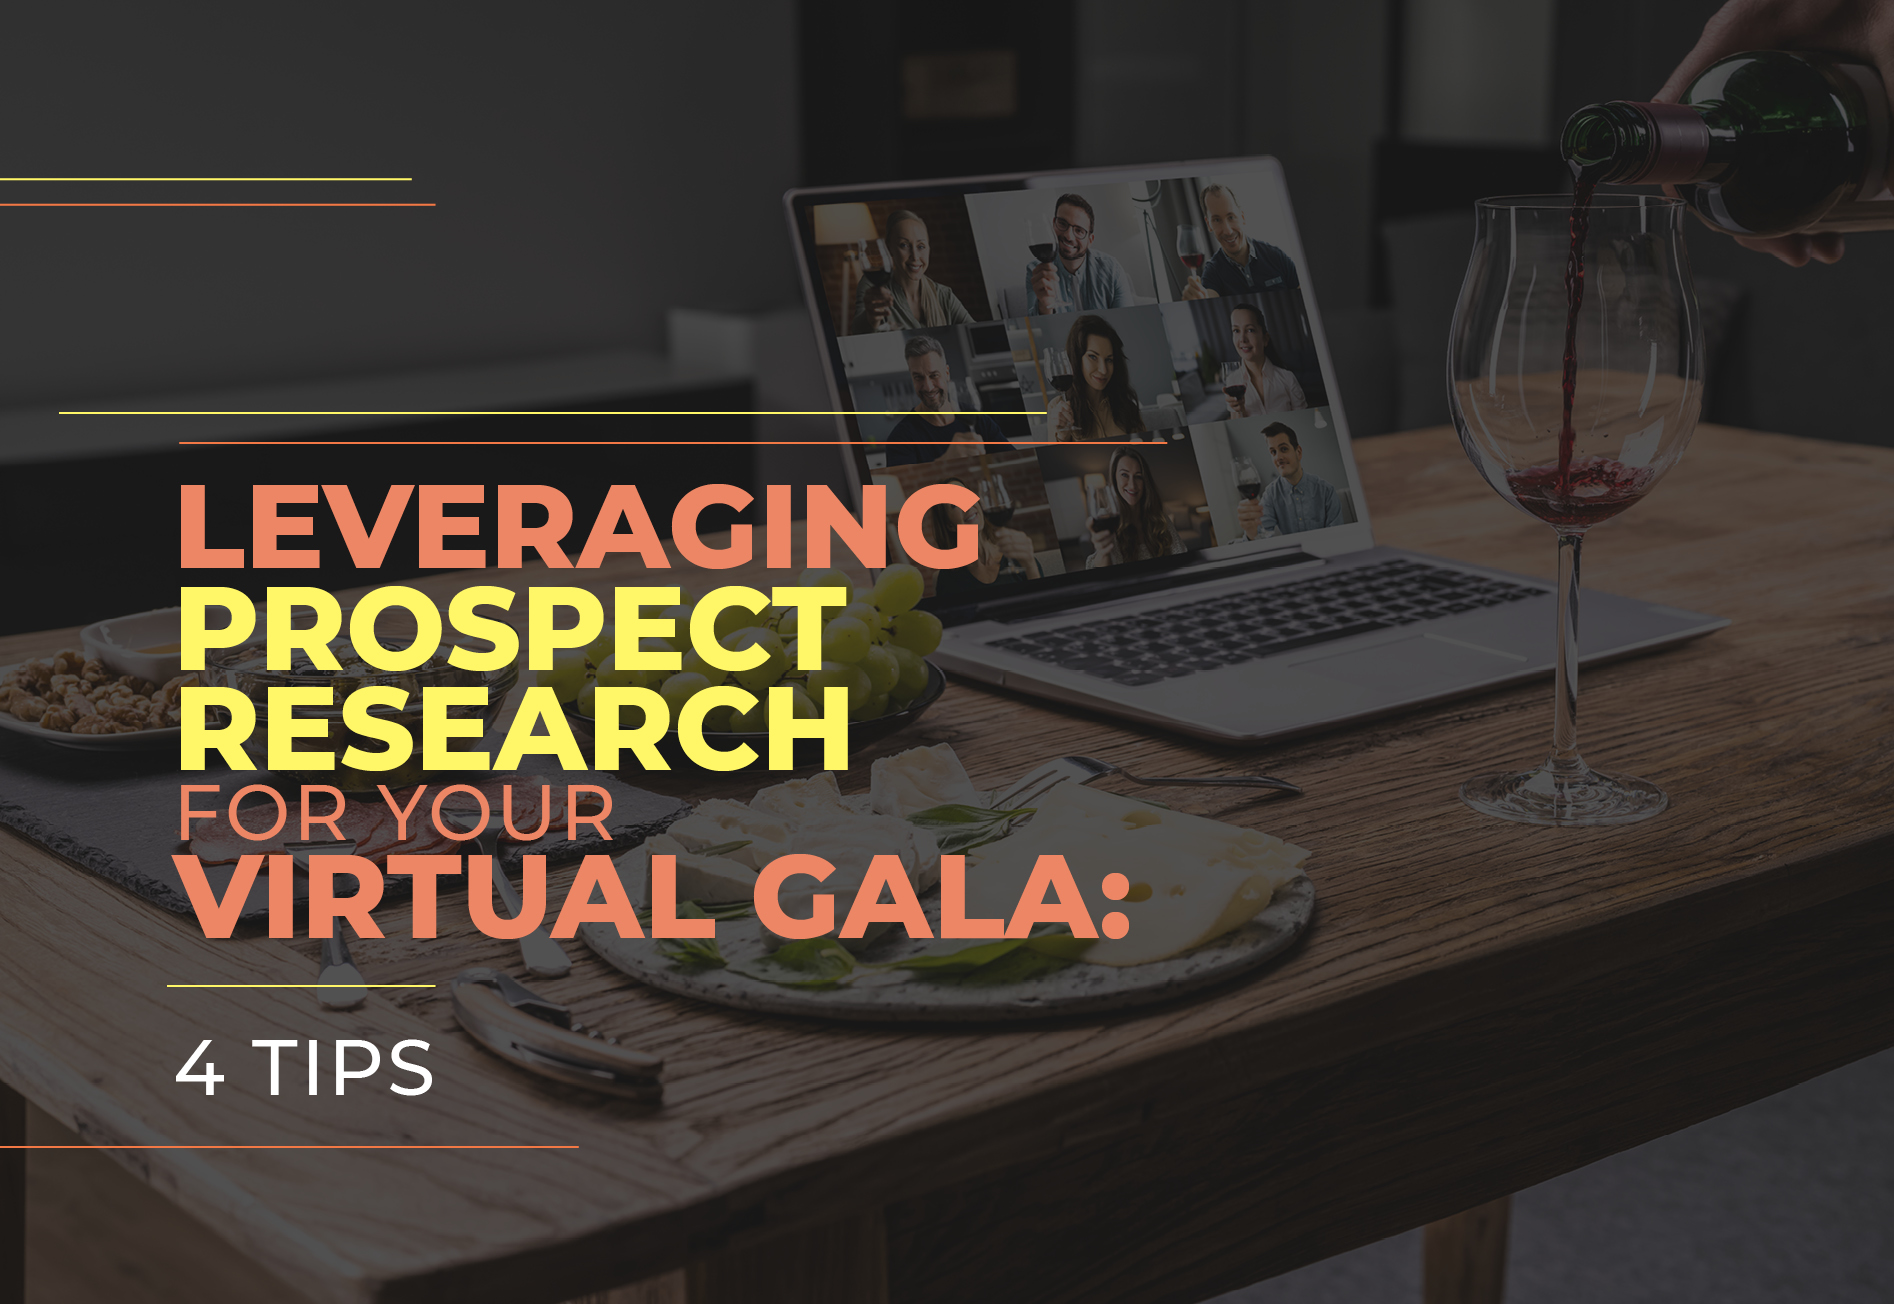 This guide will cover four tips for leveraging prospect research for your virtual gala.